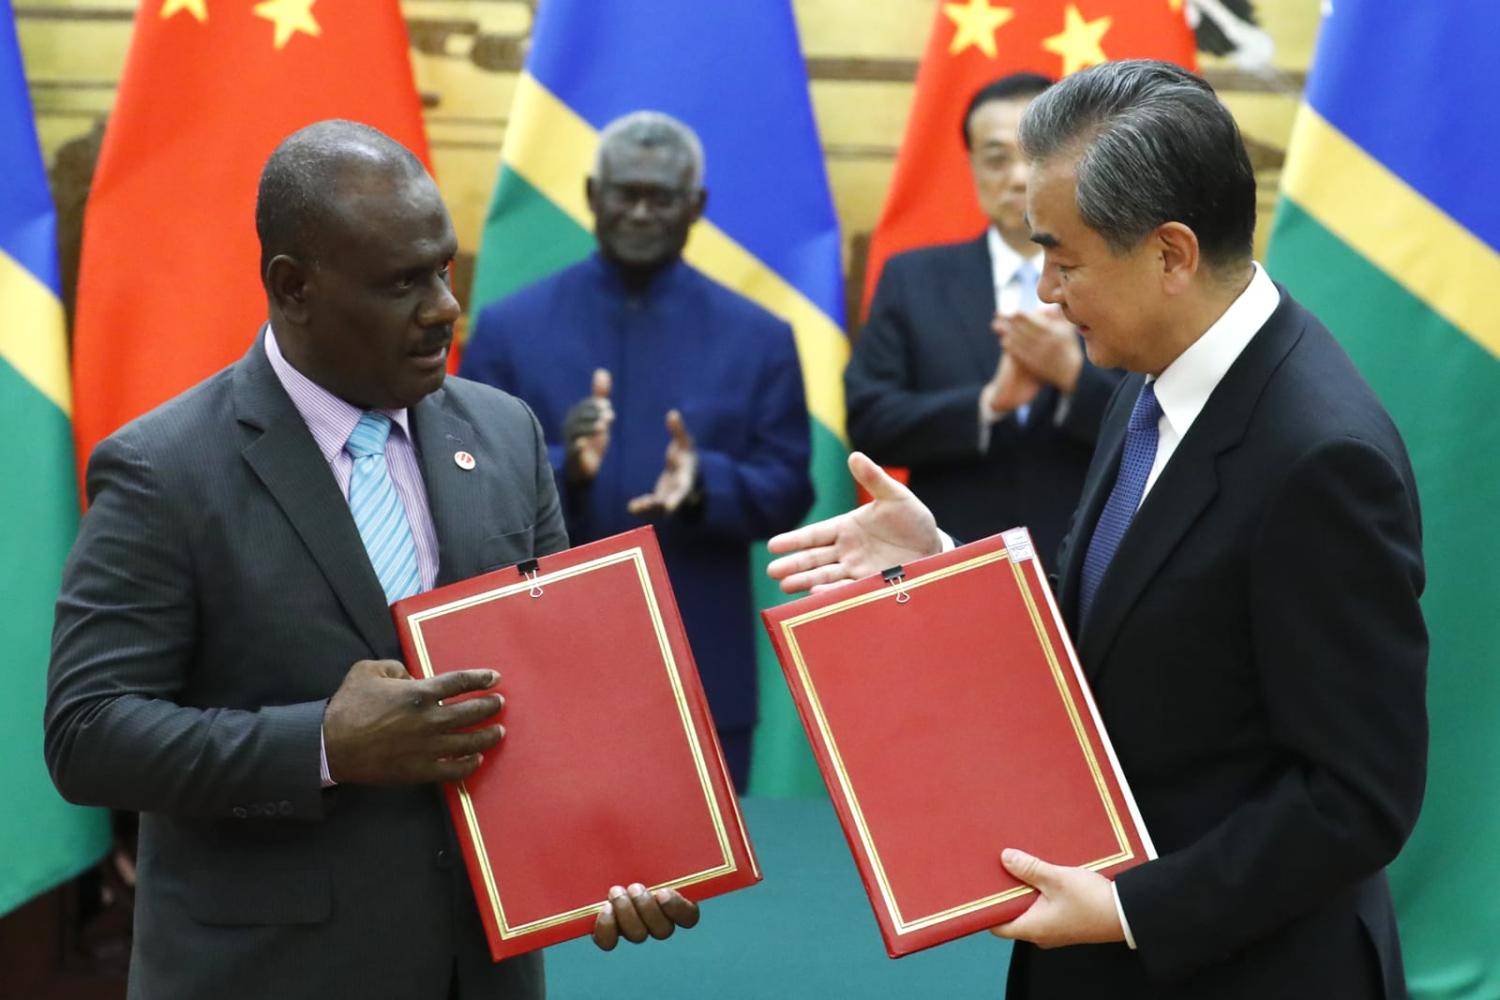 China’s Foreign Minister Wang Yi (right) with then Solomon Islands counterpart Jeremiah Manele in 2019 following the establishment of diplomatic relations (Thomas Peter via AFP/Getty Images)